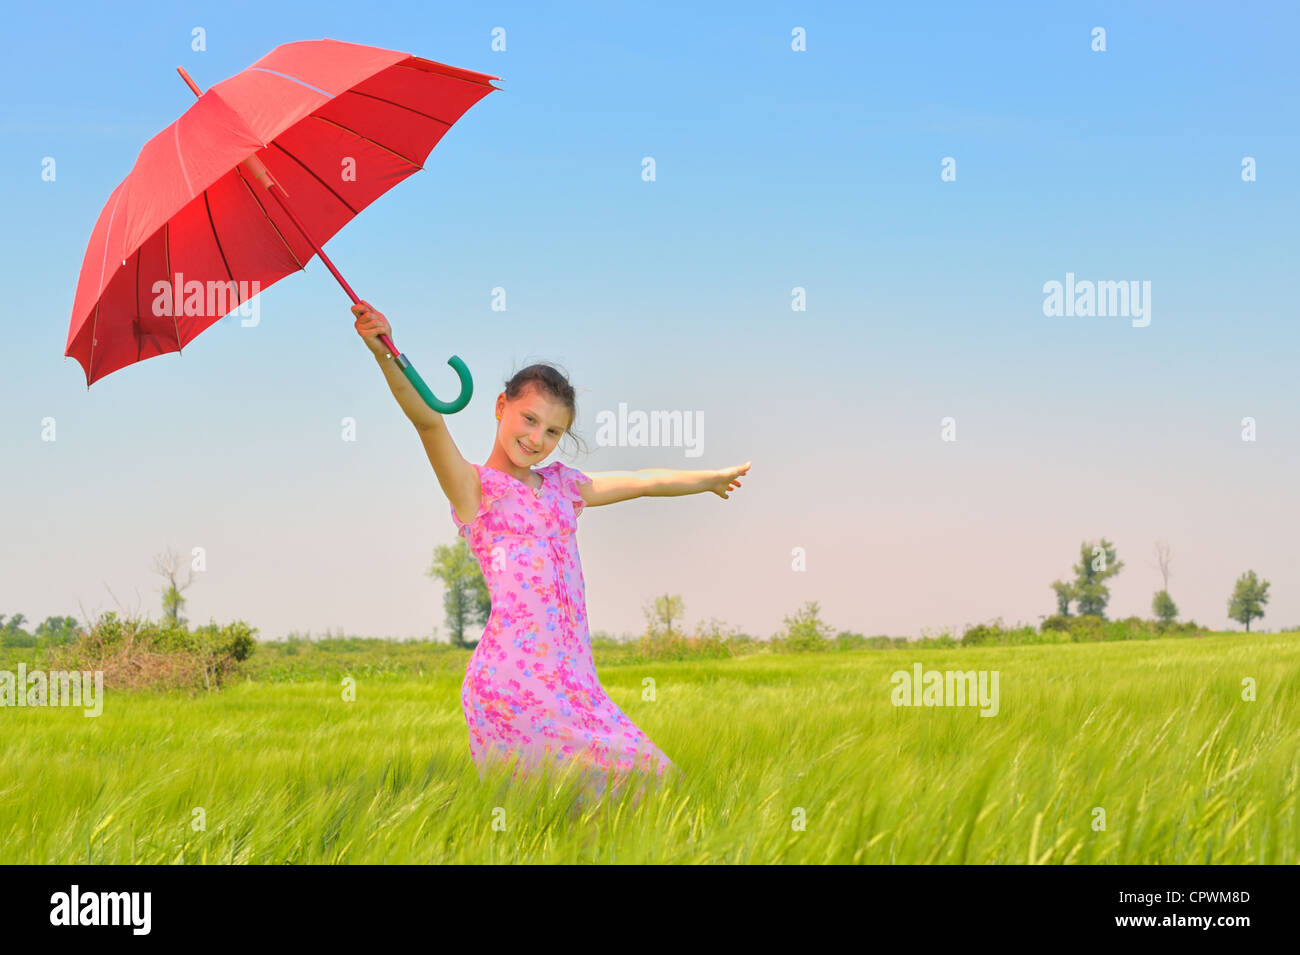 teenage girl with red umbrella in wheat field Stock Photo